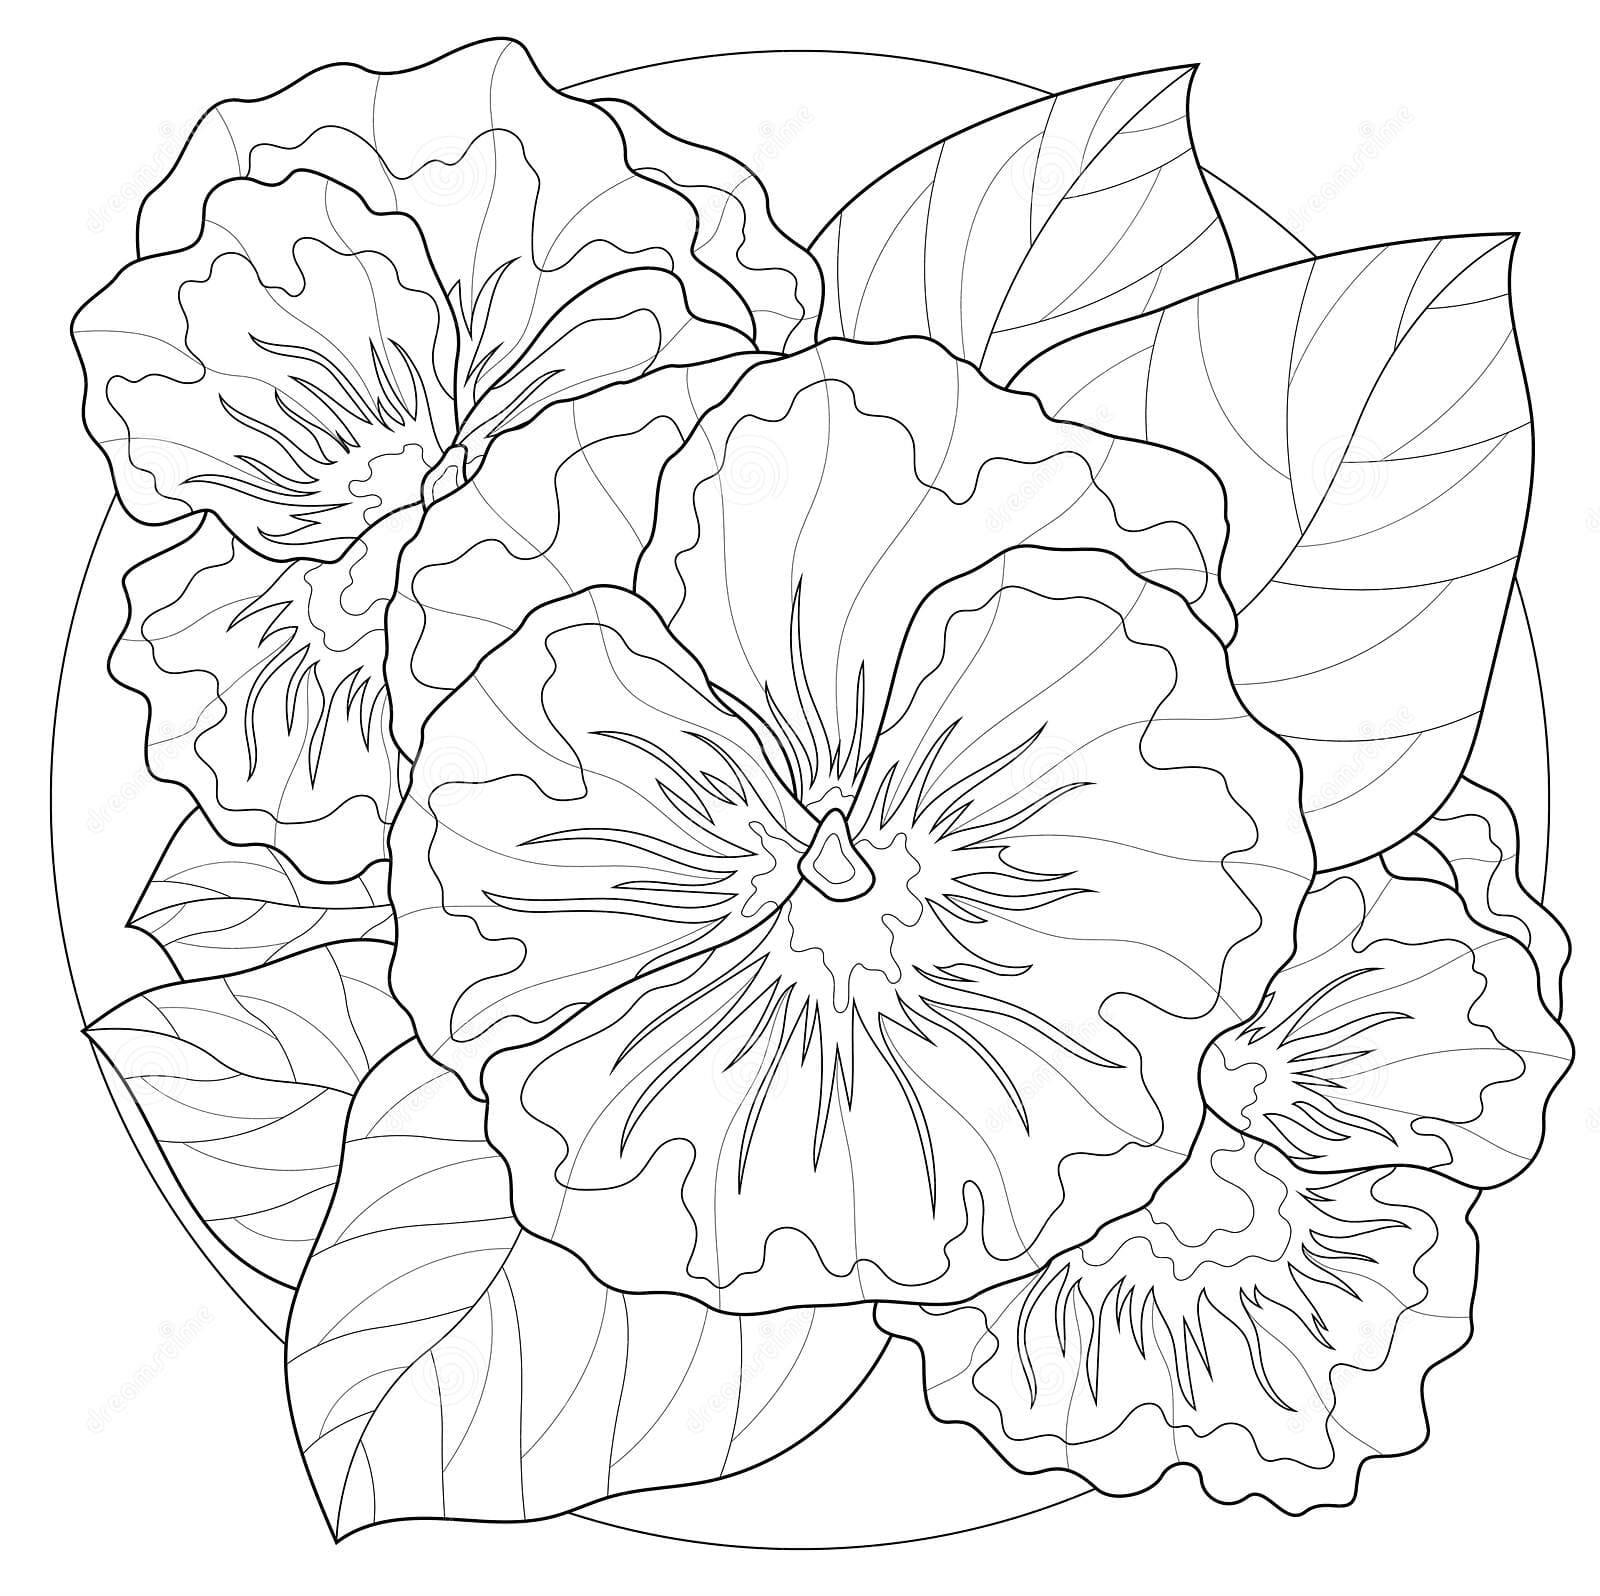 Pansy Cute Printable Image Coloring Page